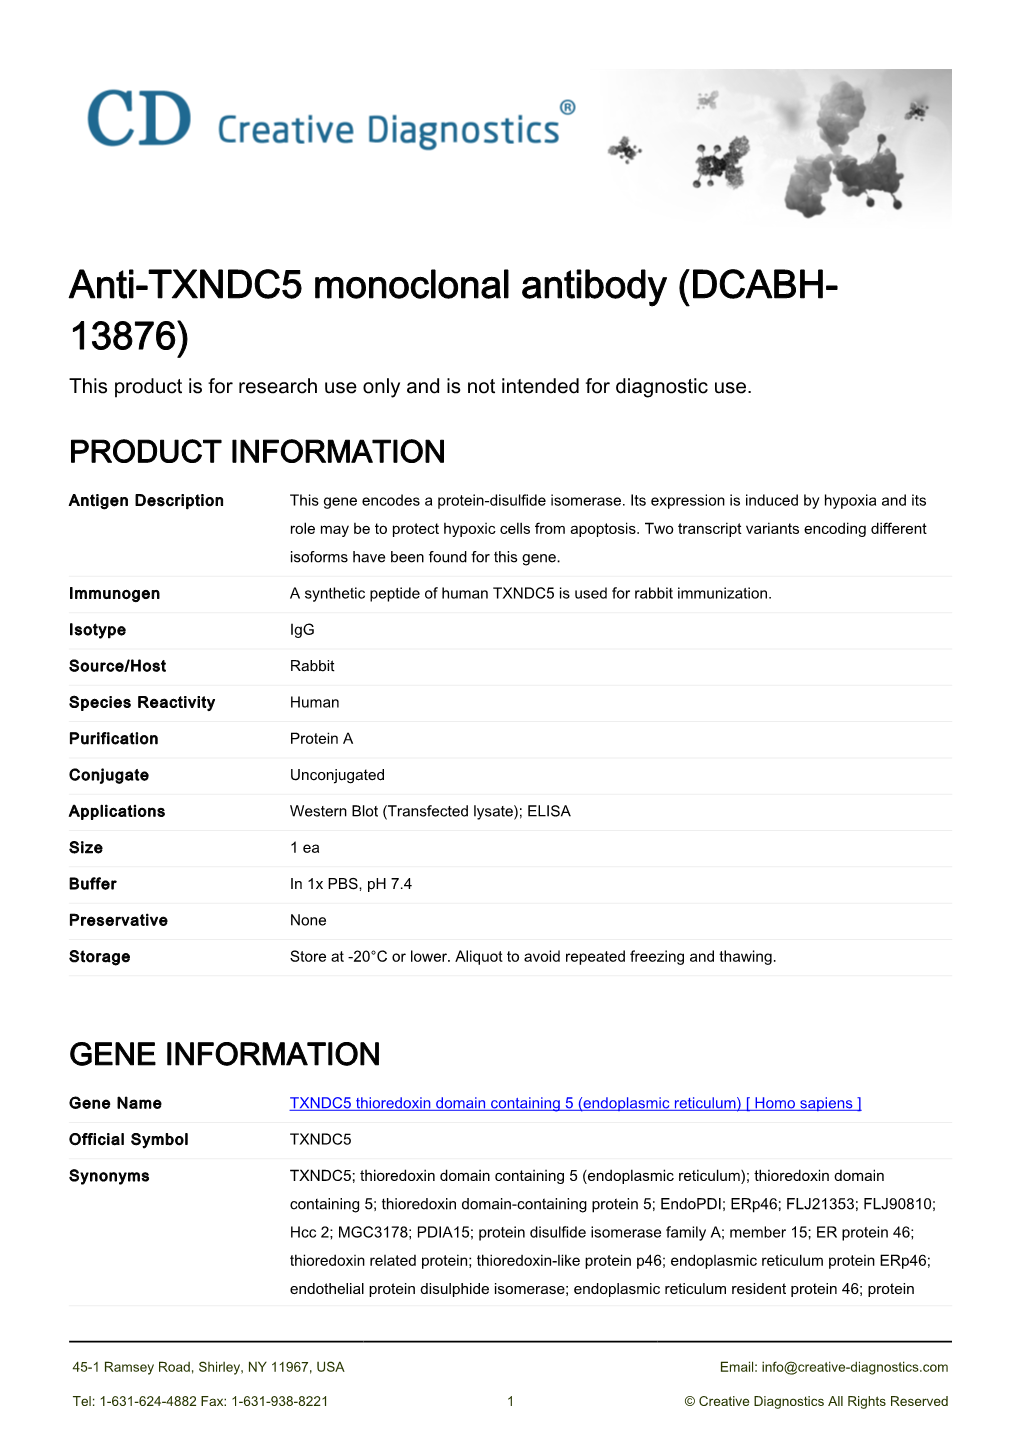 Anti-TXNDC5 Monoclonal Antibody (DCABH- 13876) This Product Is for Research Use Only and Is Not Intended for Diagnostic Use